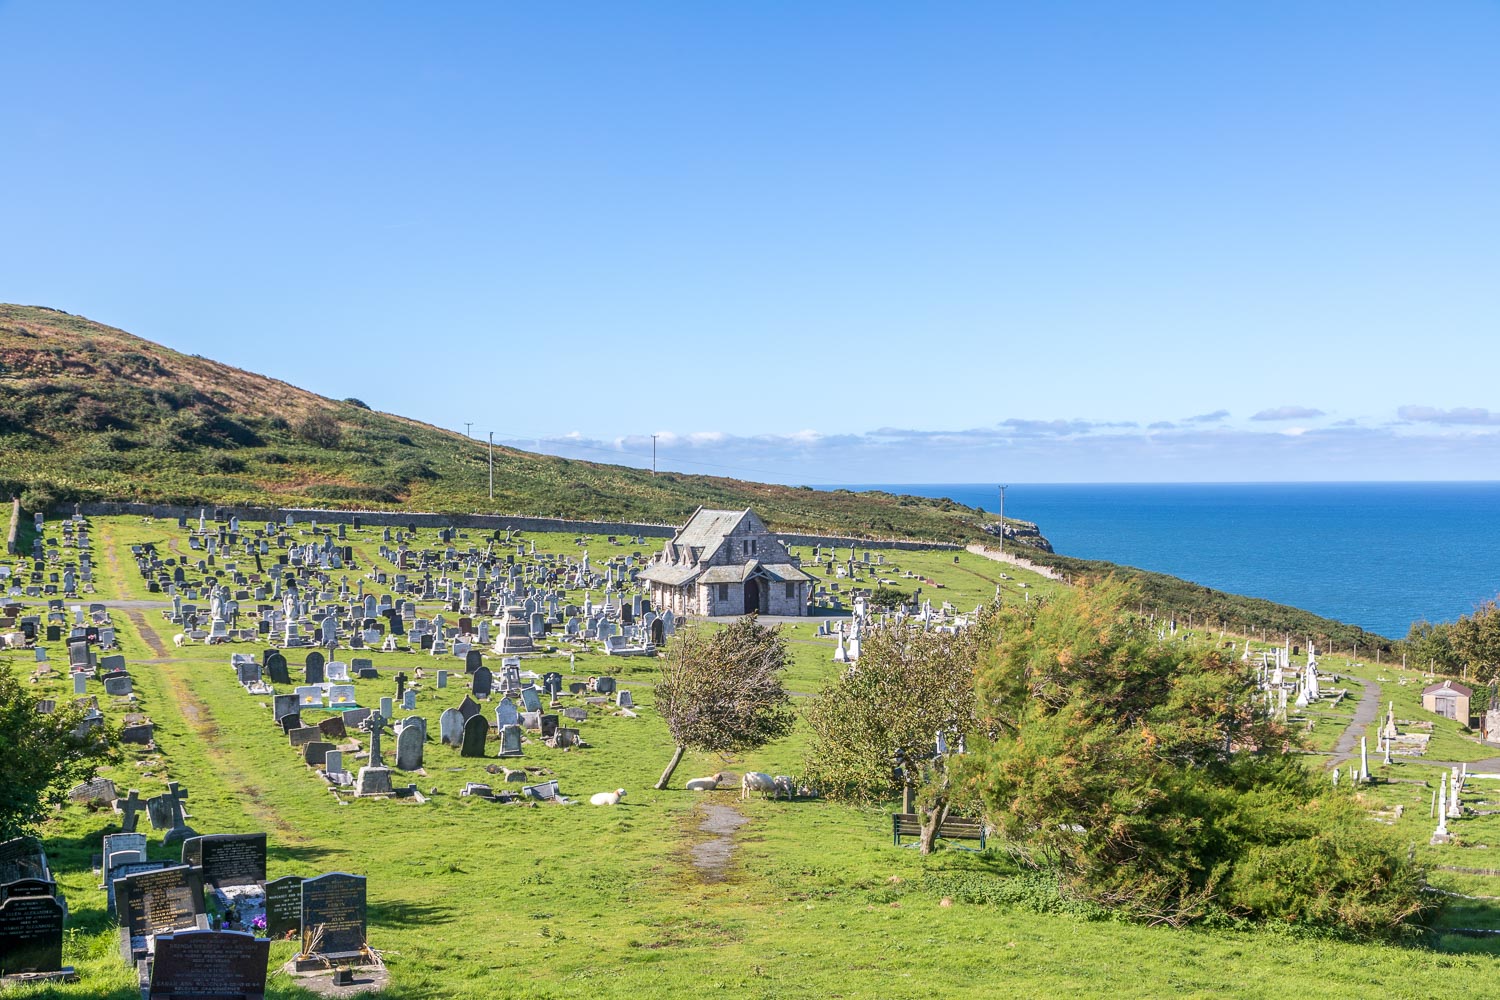 Cemetery, Great Orme